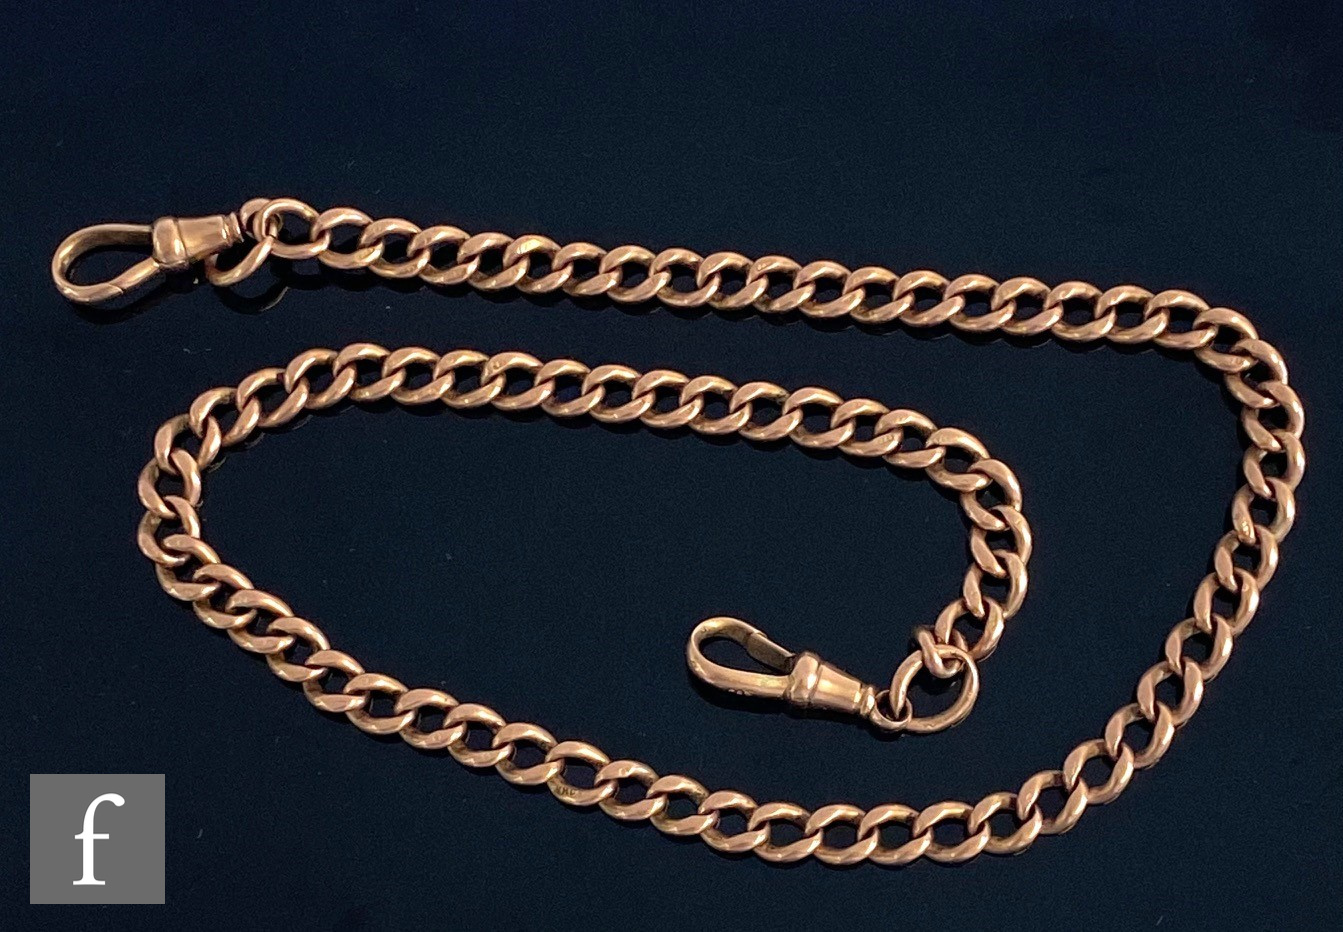 A 9ct rose gold uniform link Albert chain terminating in end swivels, weight 30g, length 41cm, S/D.